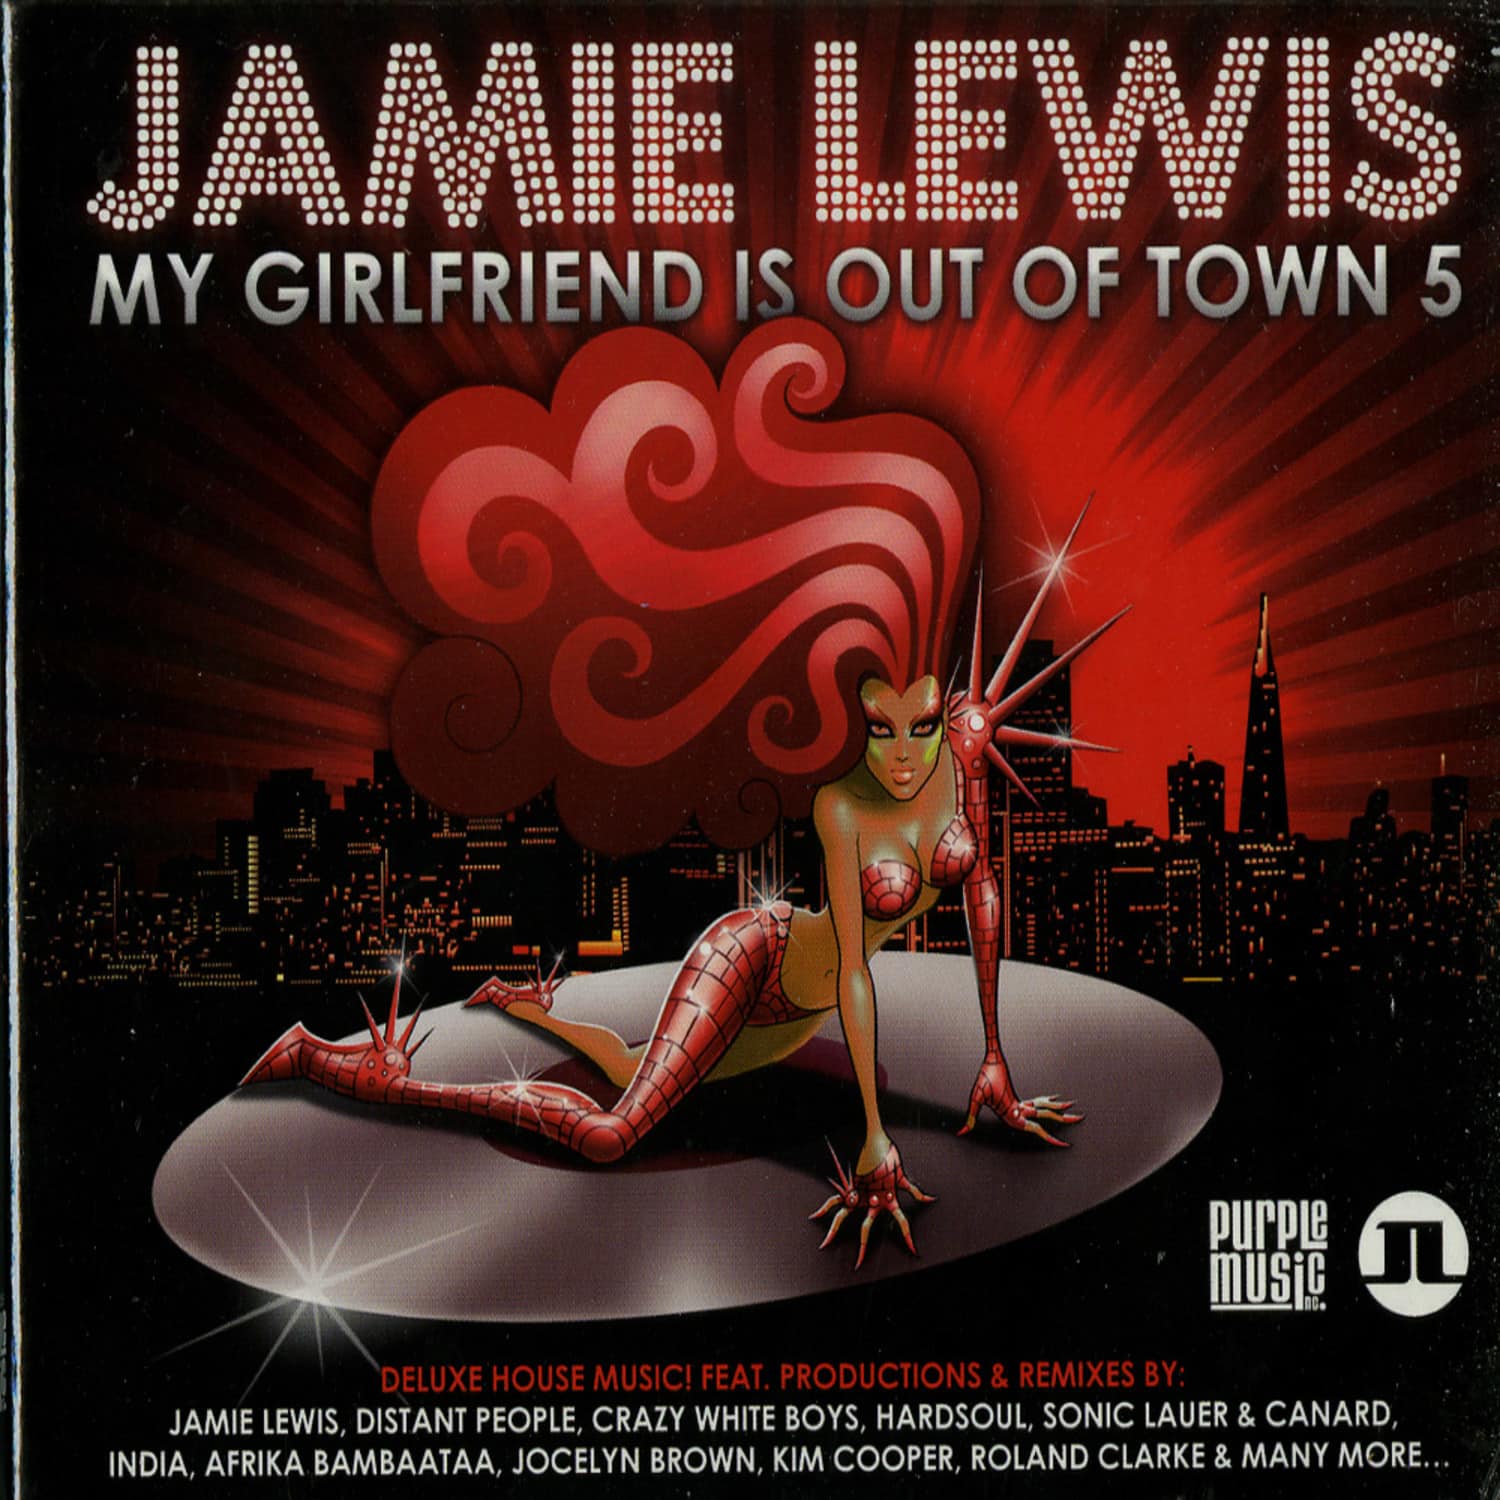 Jamie Lewis - MY GIRLFRIEND IS OUT OF TOWN 5  